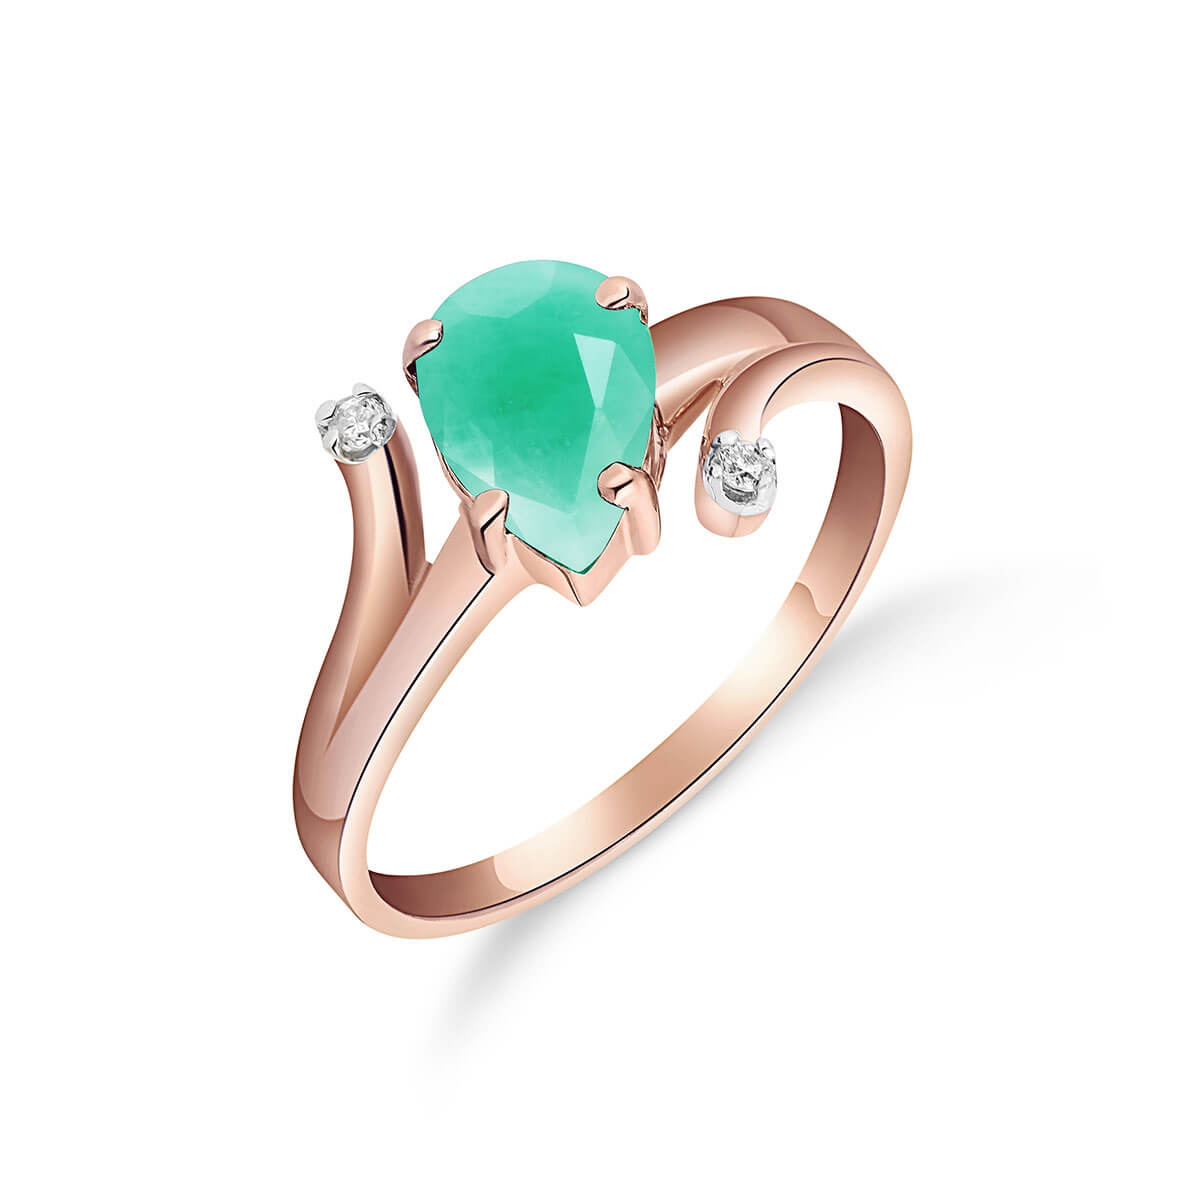 Emerald & Diamond Flank Ring in 9ct Rose Gold